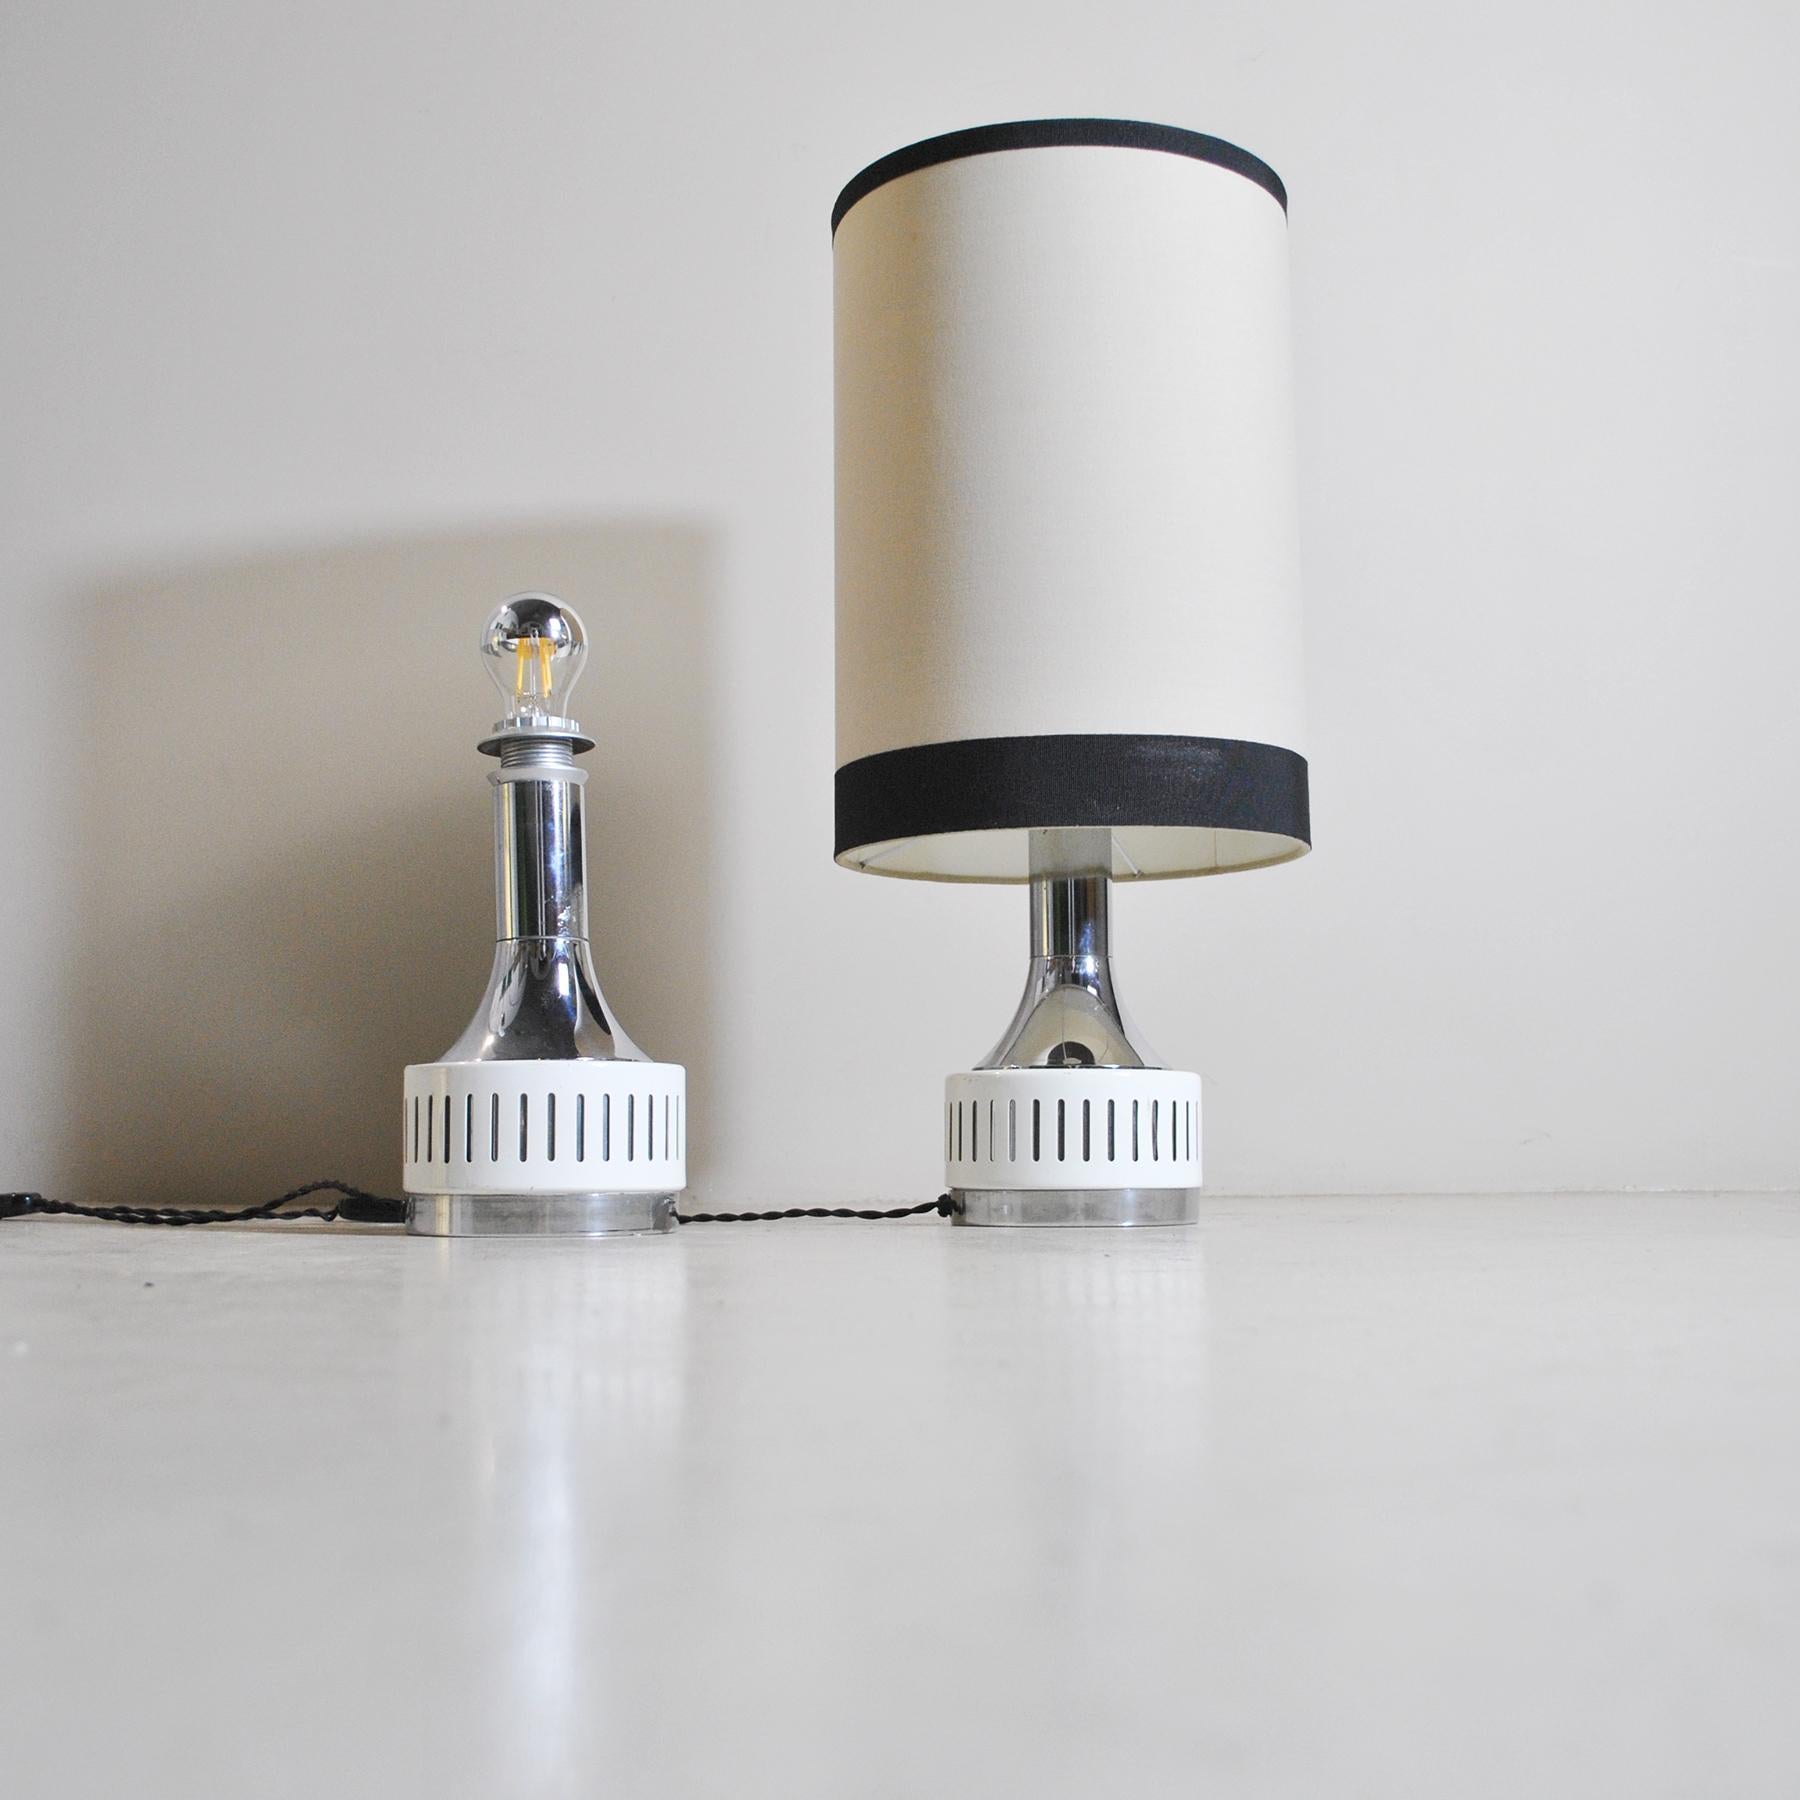 Steel Italian Midcentury Table Lamps from the Sixties For Sale